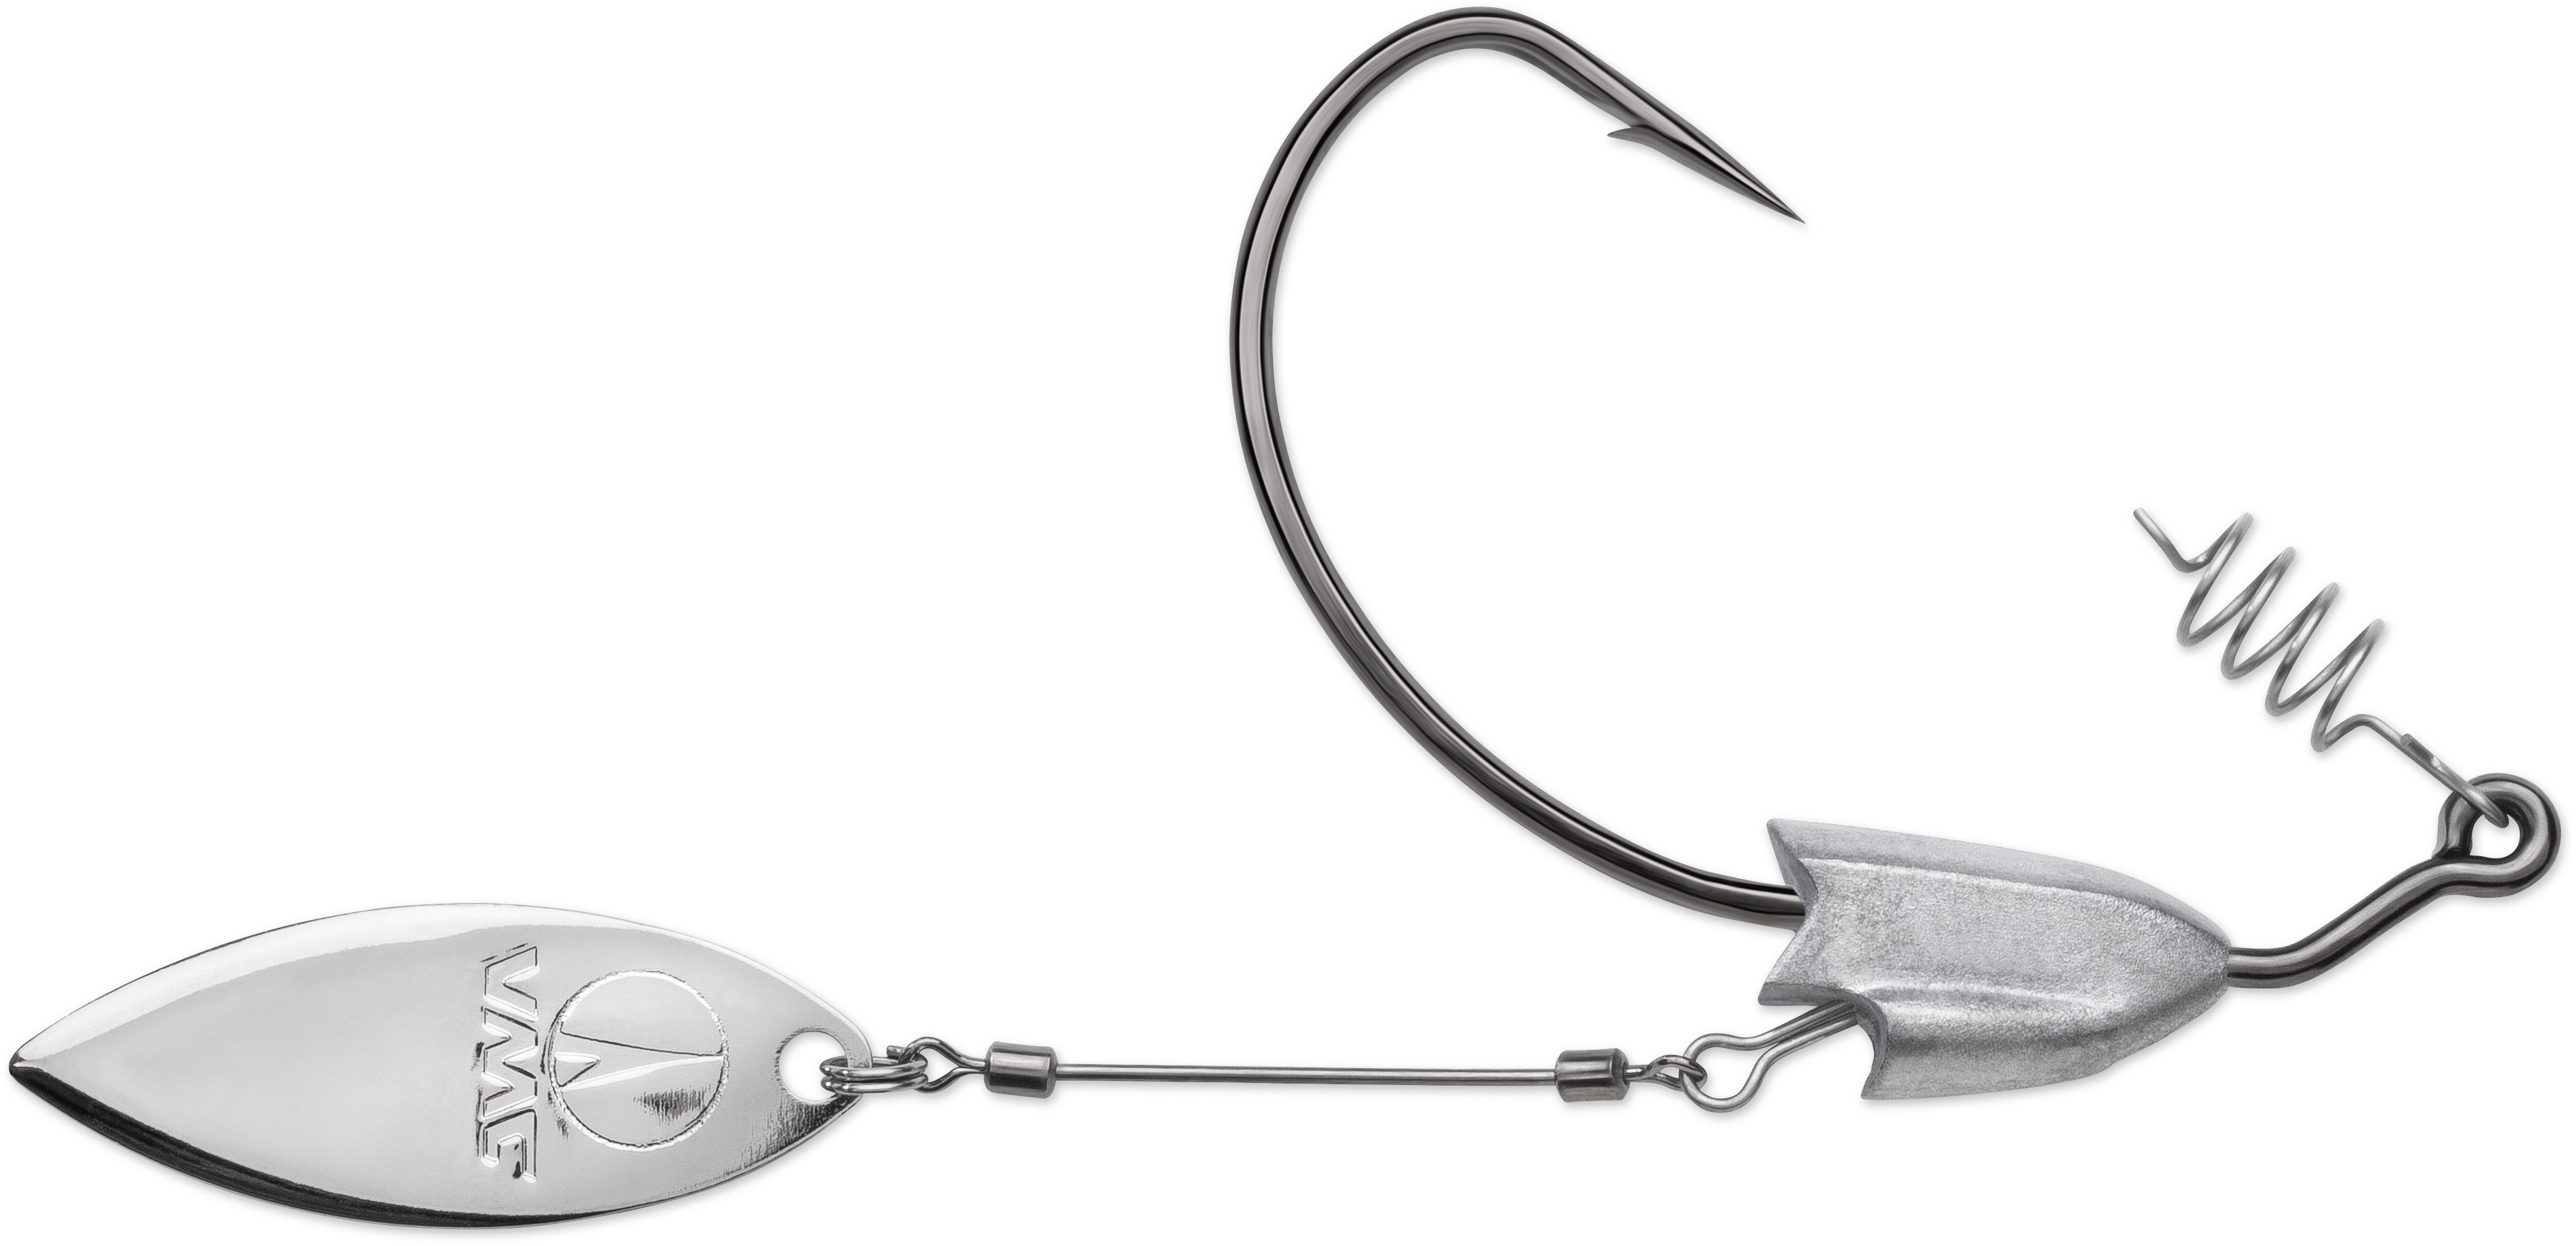 VMC Heavy Duty Weighted Willow Swimbait Hook, 3/8oz, Adjustable Spinner  Arm, Hi Carbon Steel